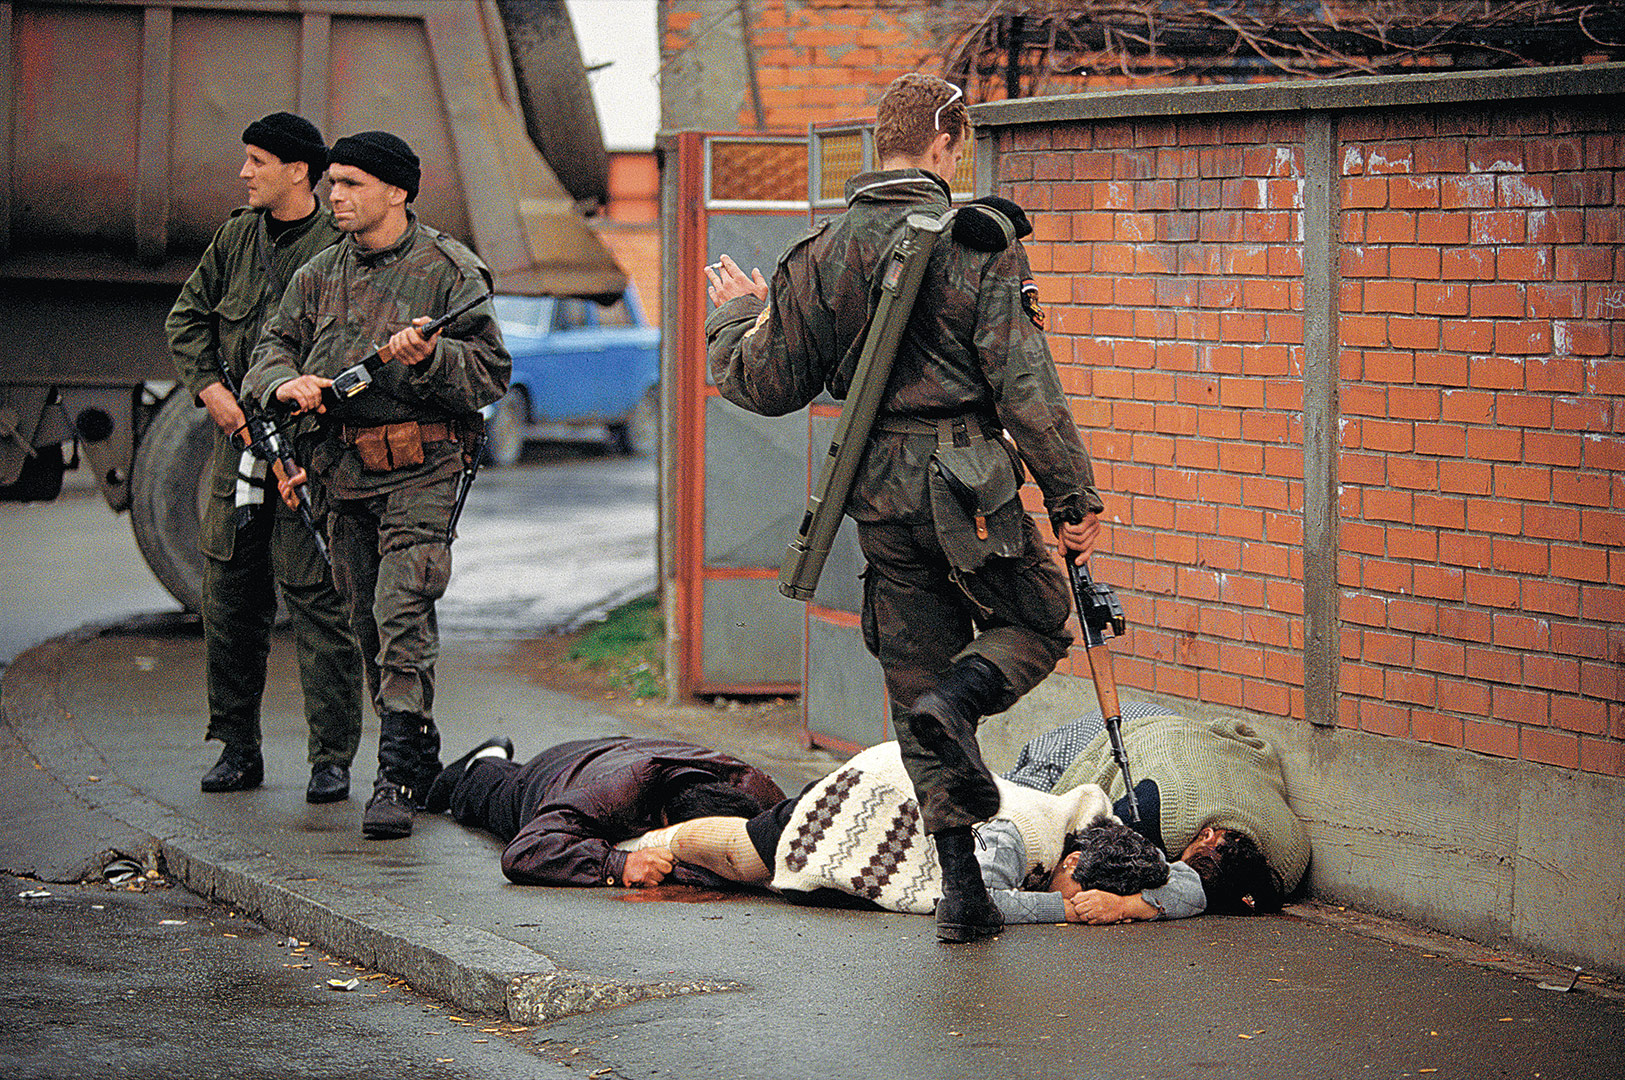 Bosnia Photographs The Most Influential Image Of All Time